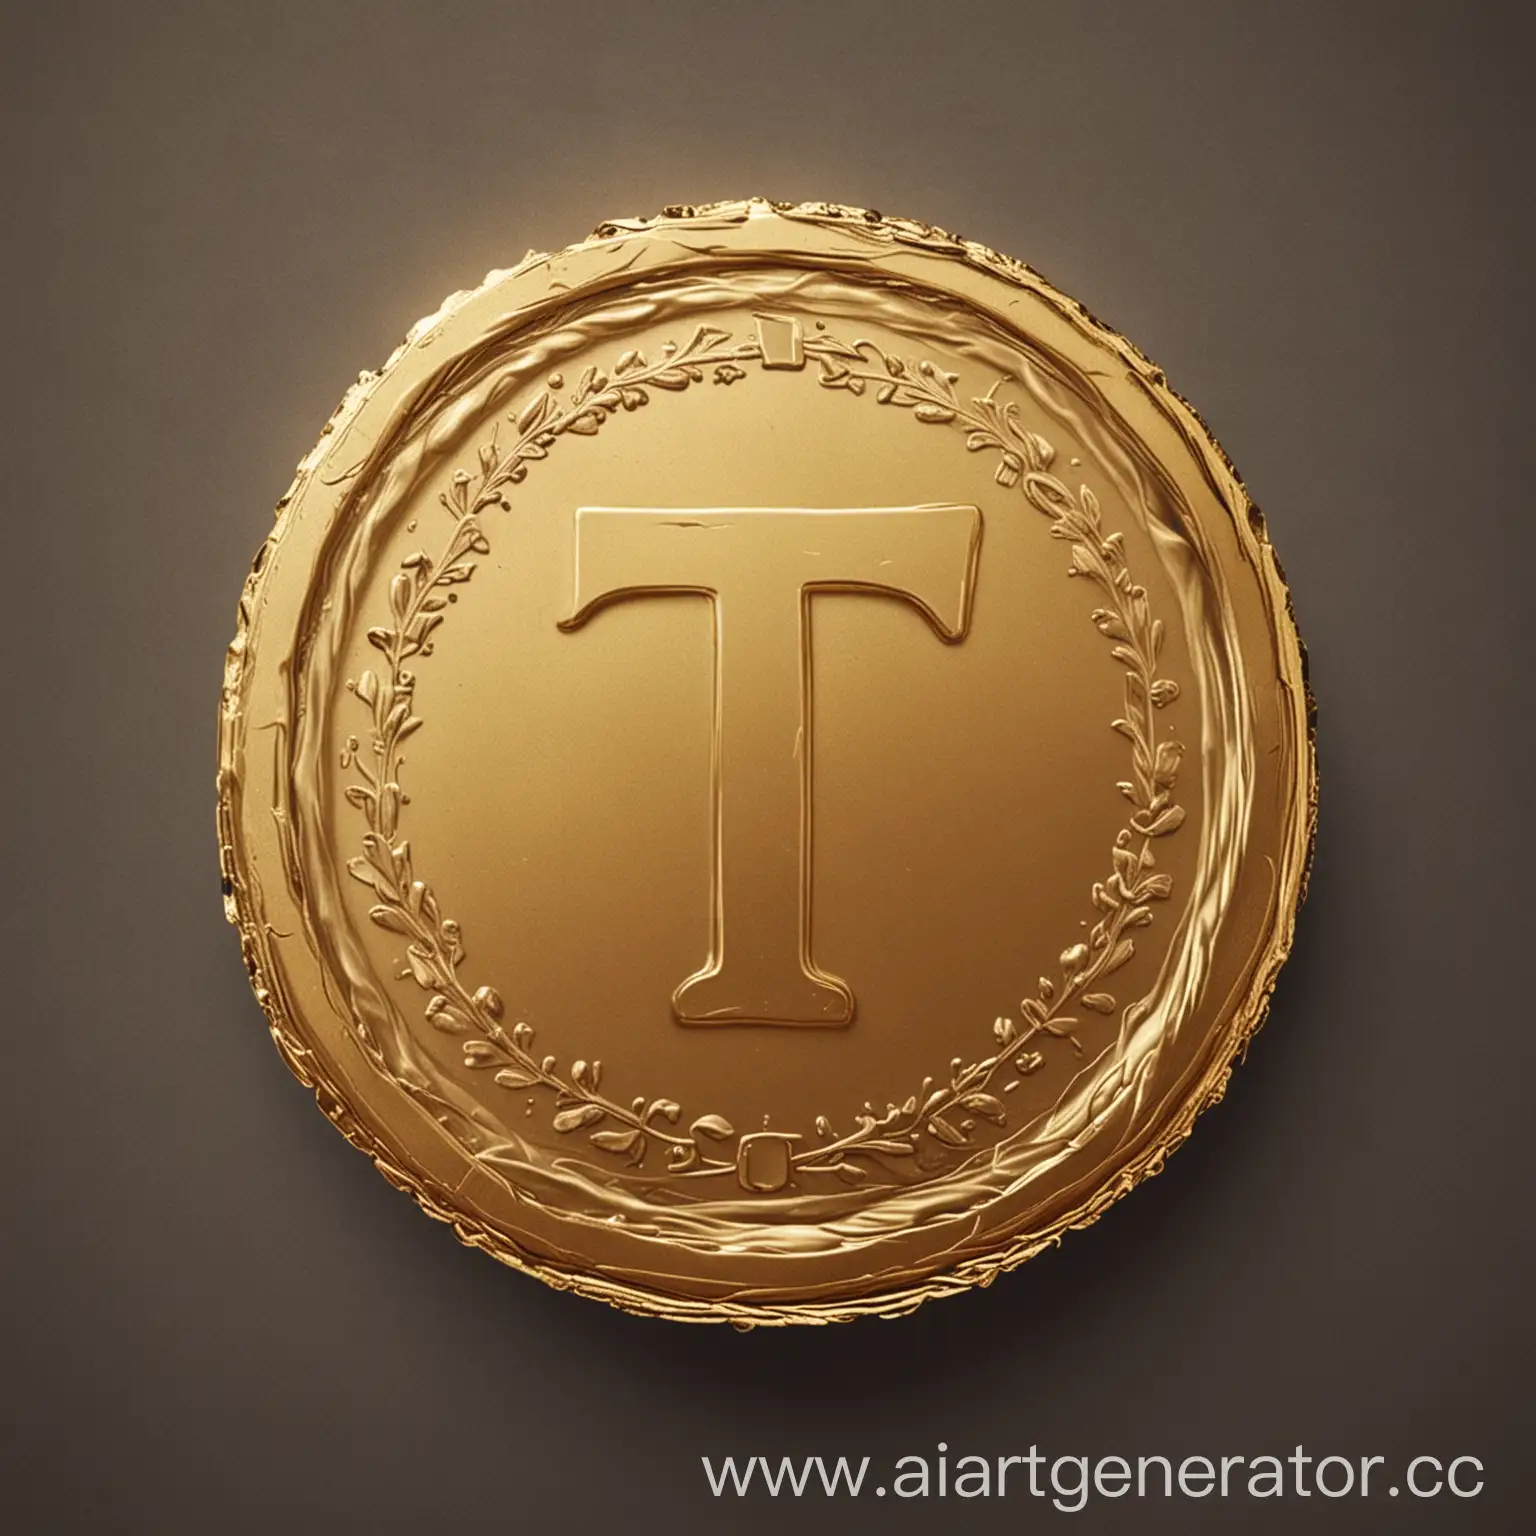 Golden-Coin-with-Letter-T-Shiny-Metallic-Currency-with-Engraved-T-Symbol